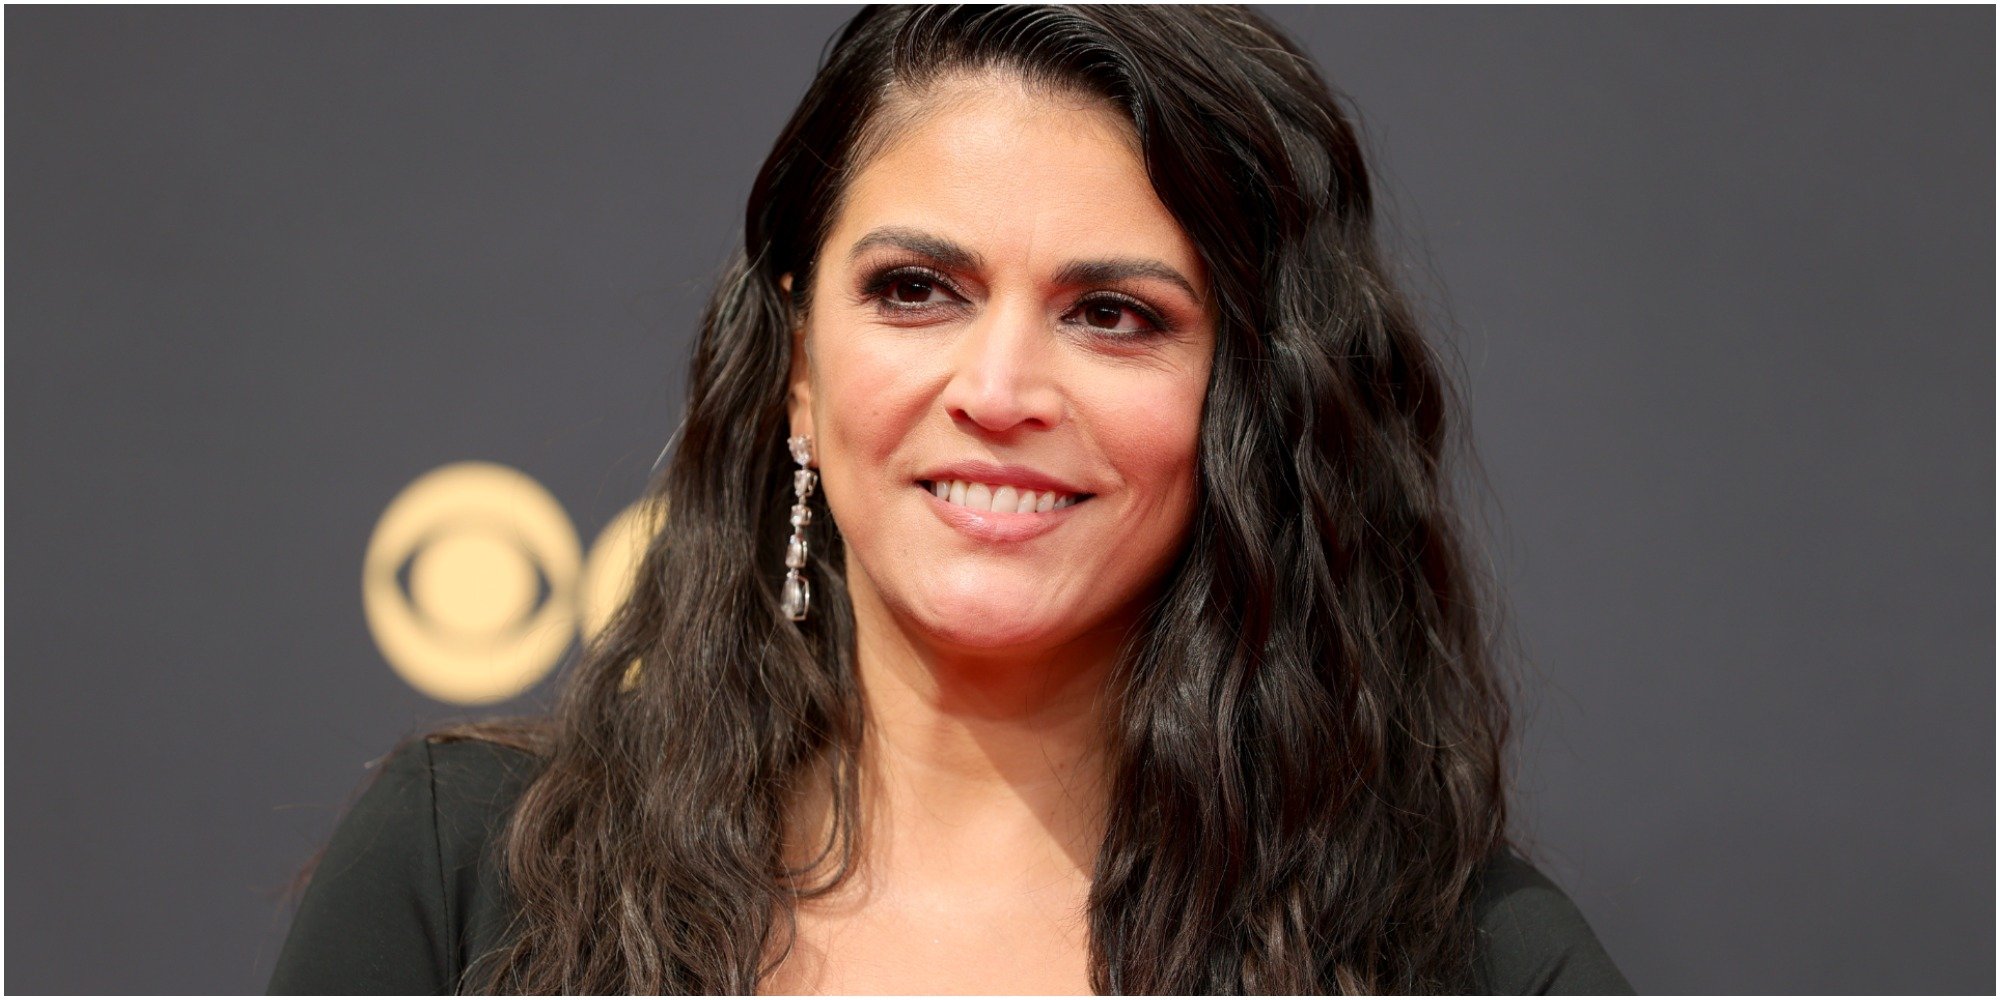 Cecily Strong on the red carpet at the 2021 Emmy Awards where she revealed if she would return to "Saturday Night Live."